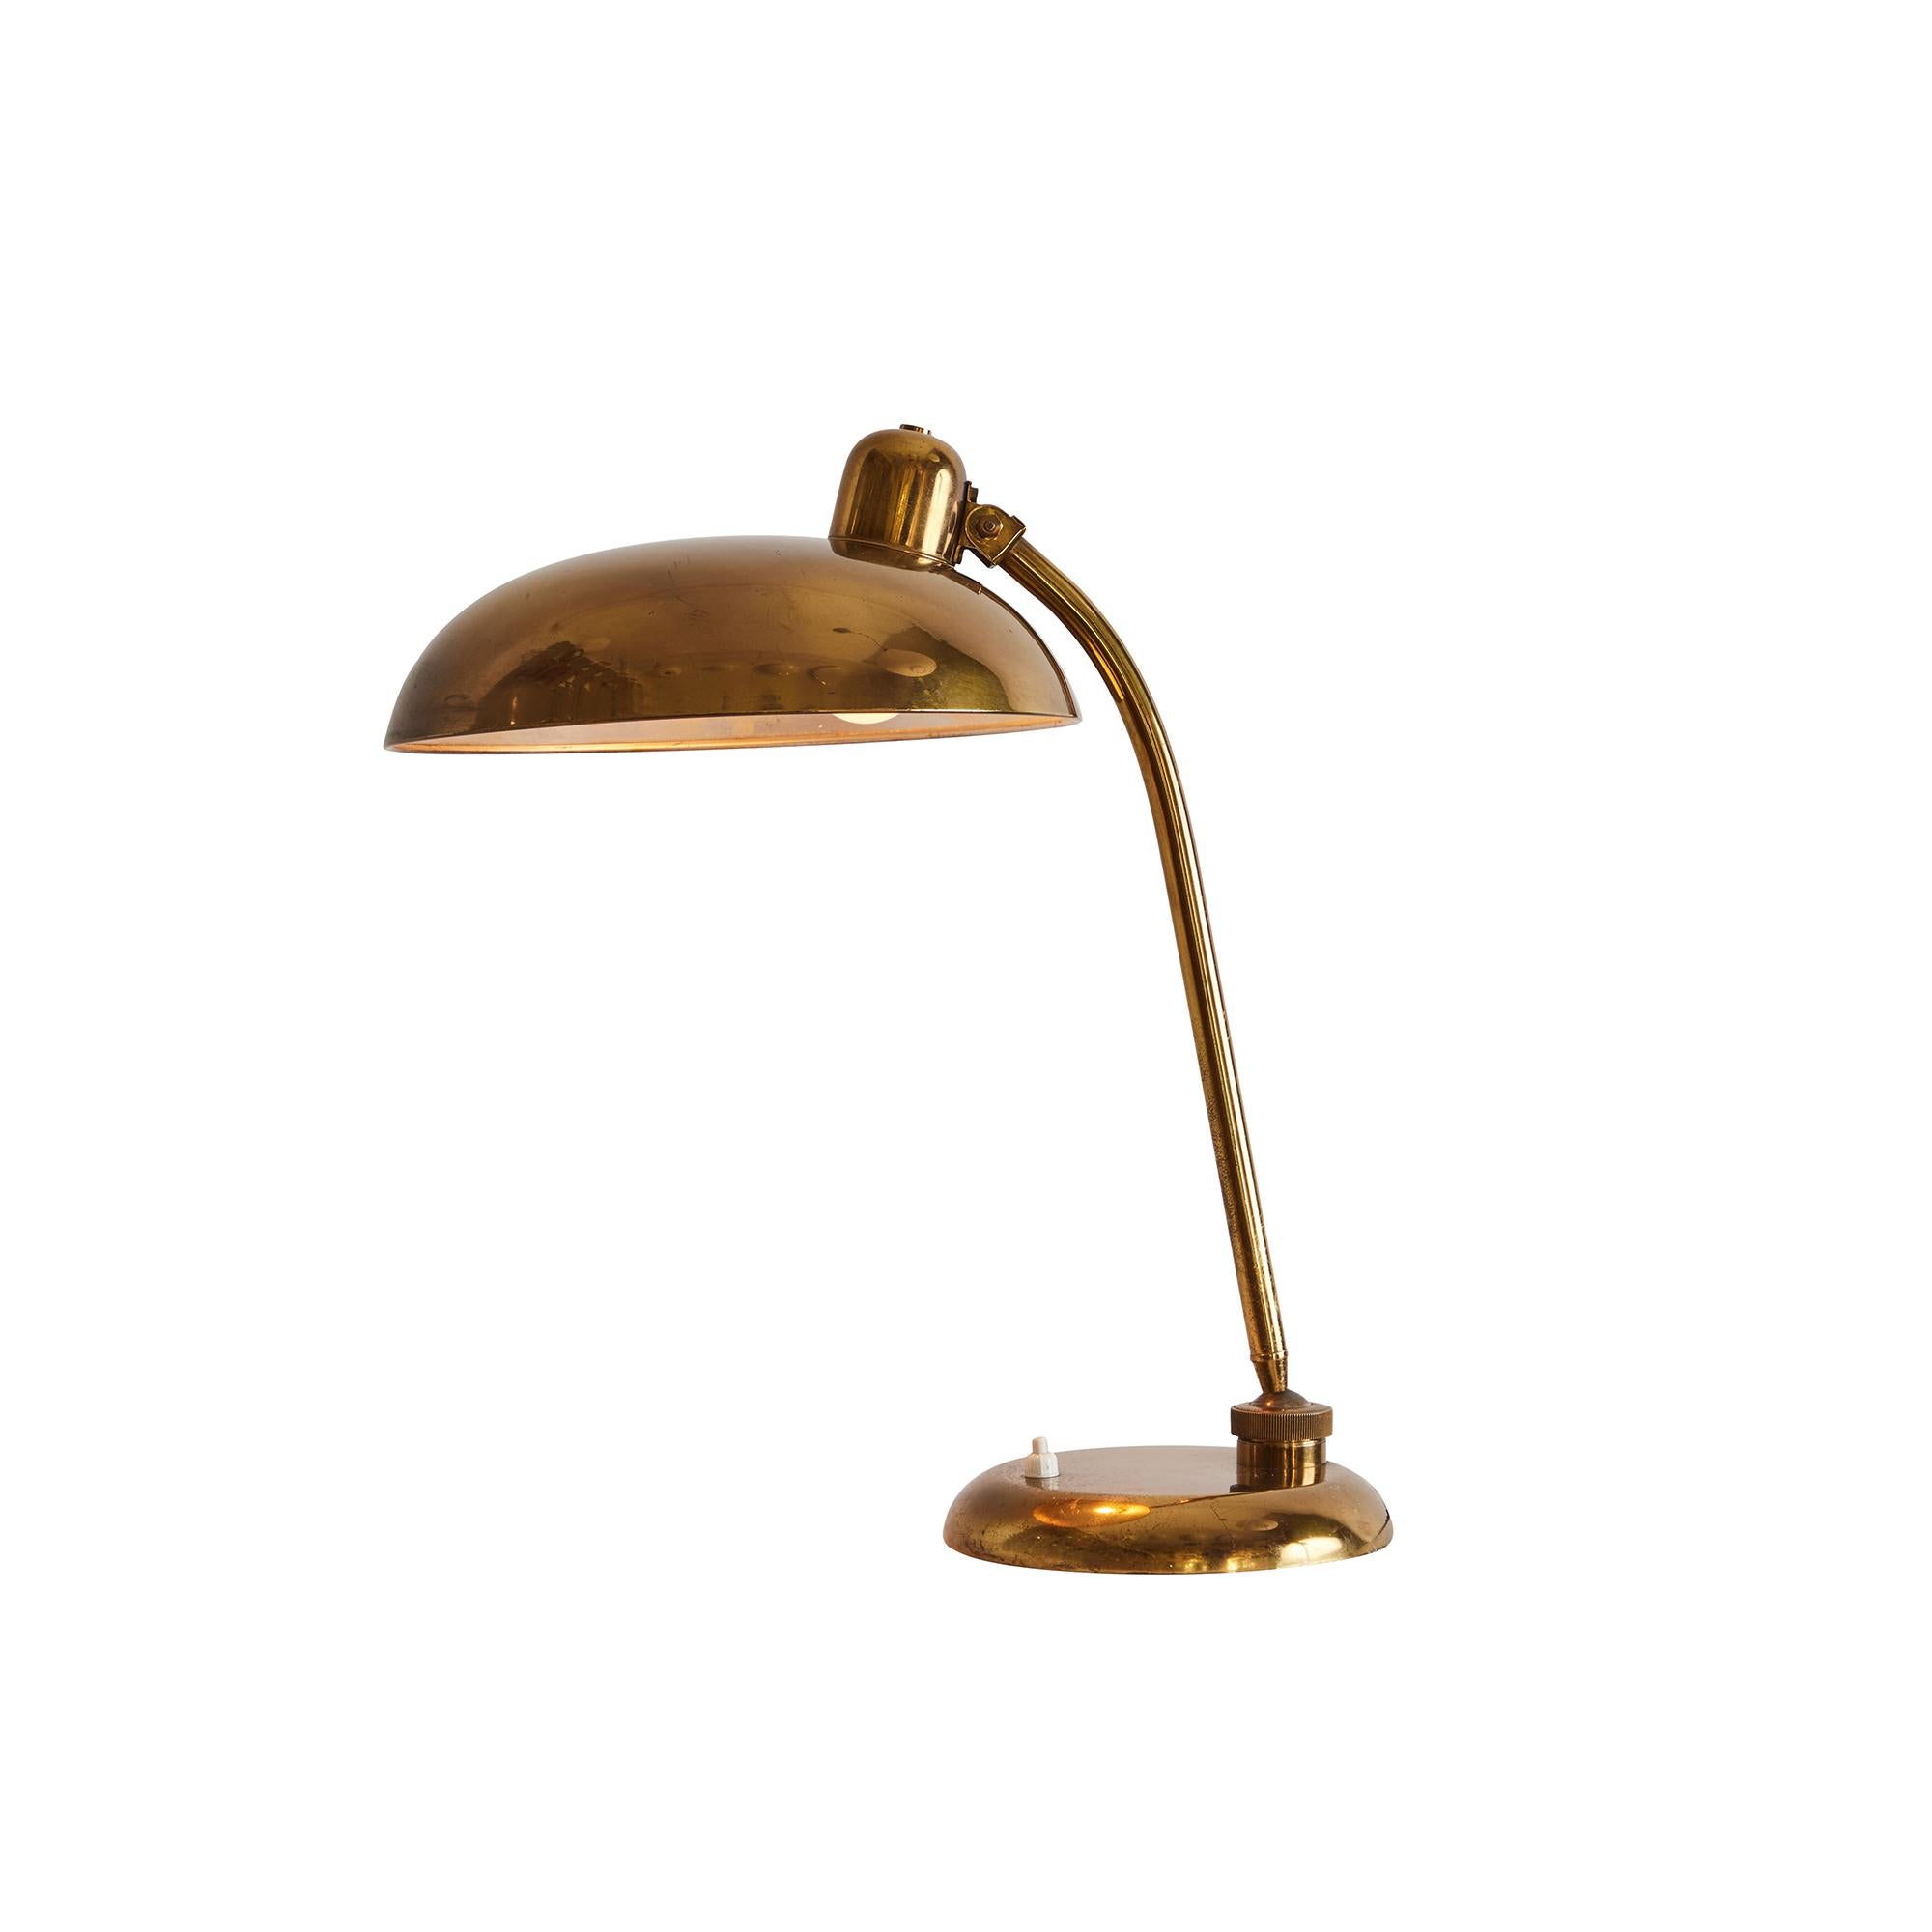 1940s Giovanni Michelucci Patinated Brass Ministerial Table Lamp for Lariolux For Sale 9